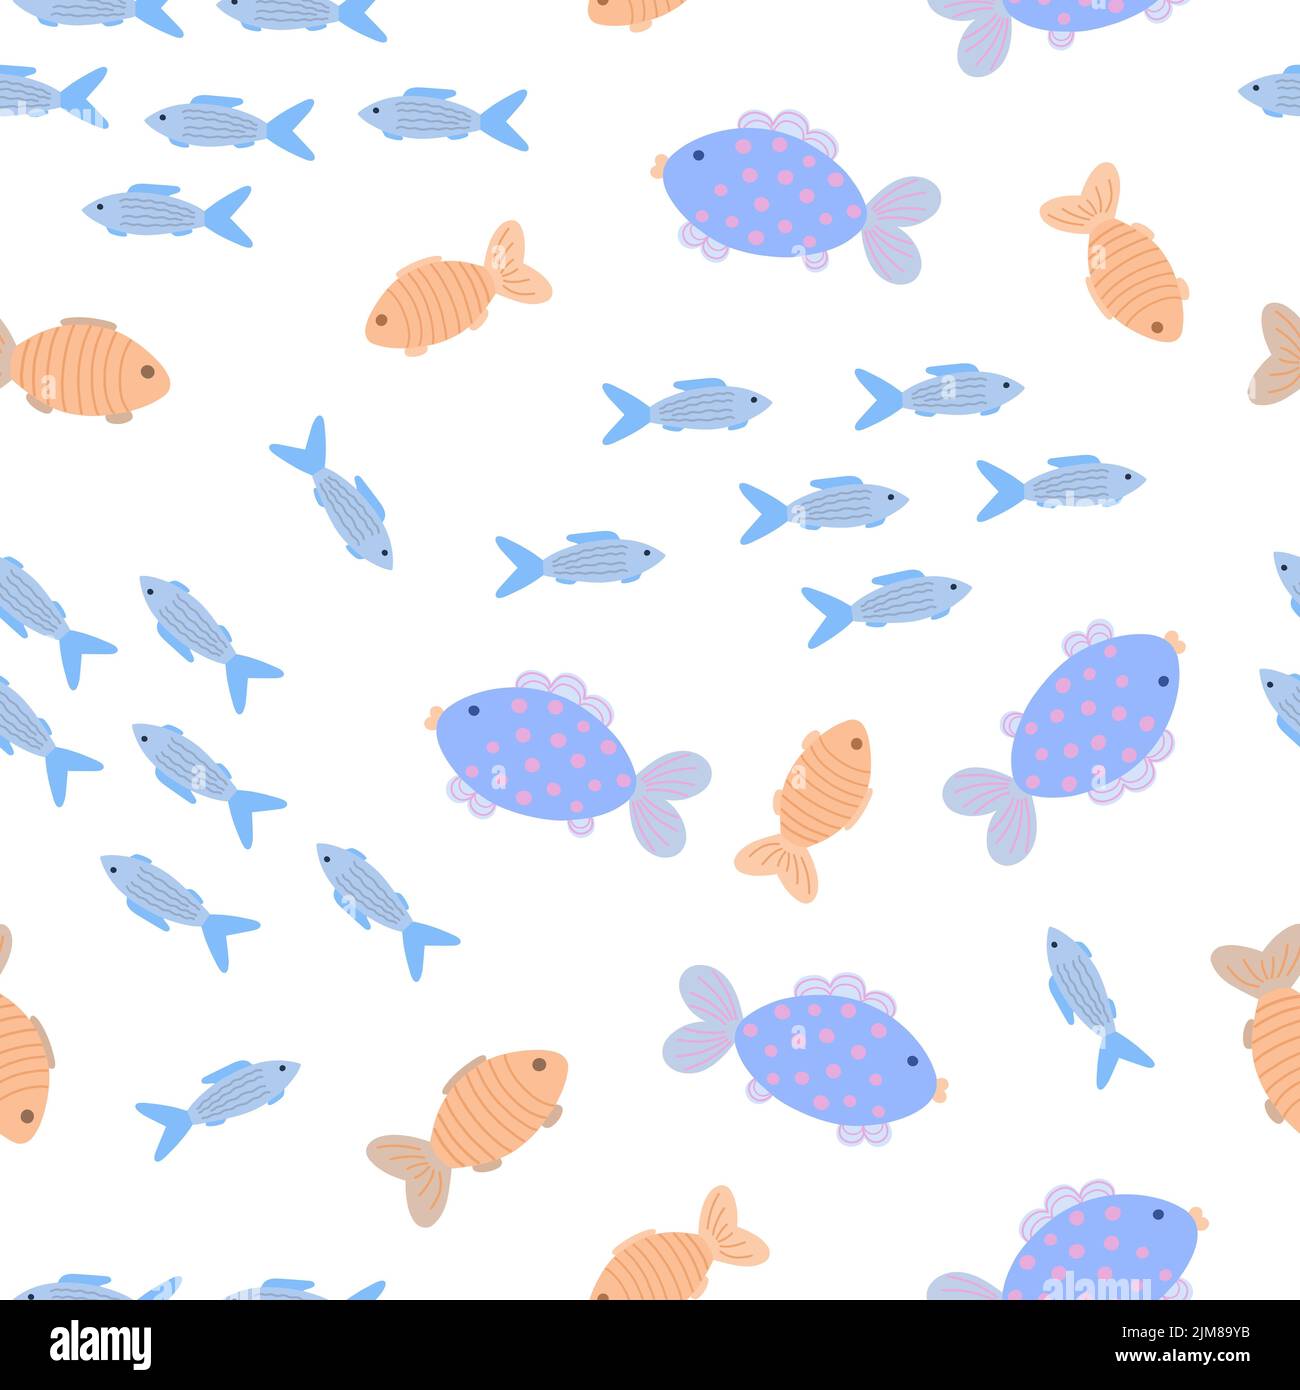 Cute fish sea or river creatures seamless pattern simple flat style doodle vector illustration, underwater cartoon marine life repeat ornament for textile, nursery room decor, home design Stock Vector